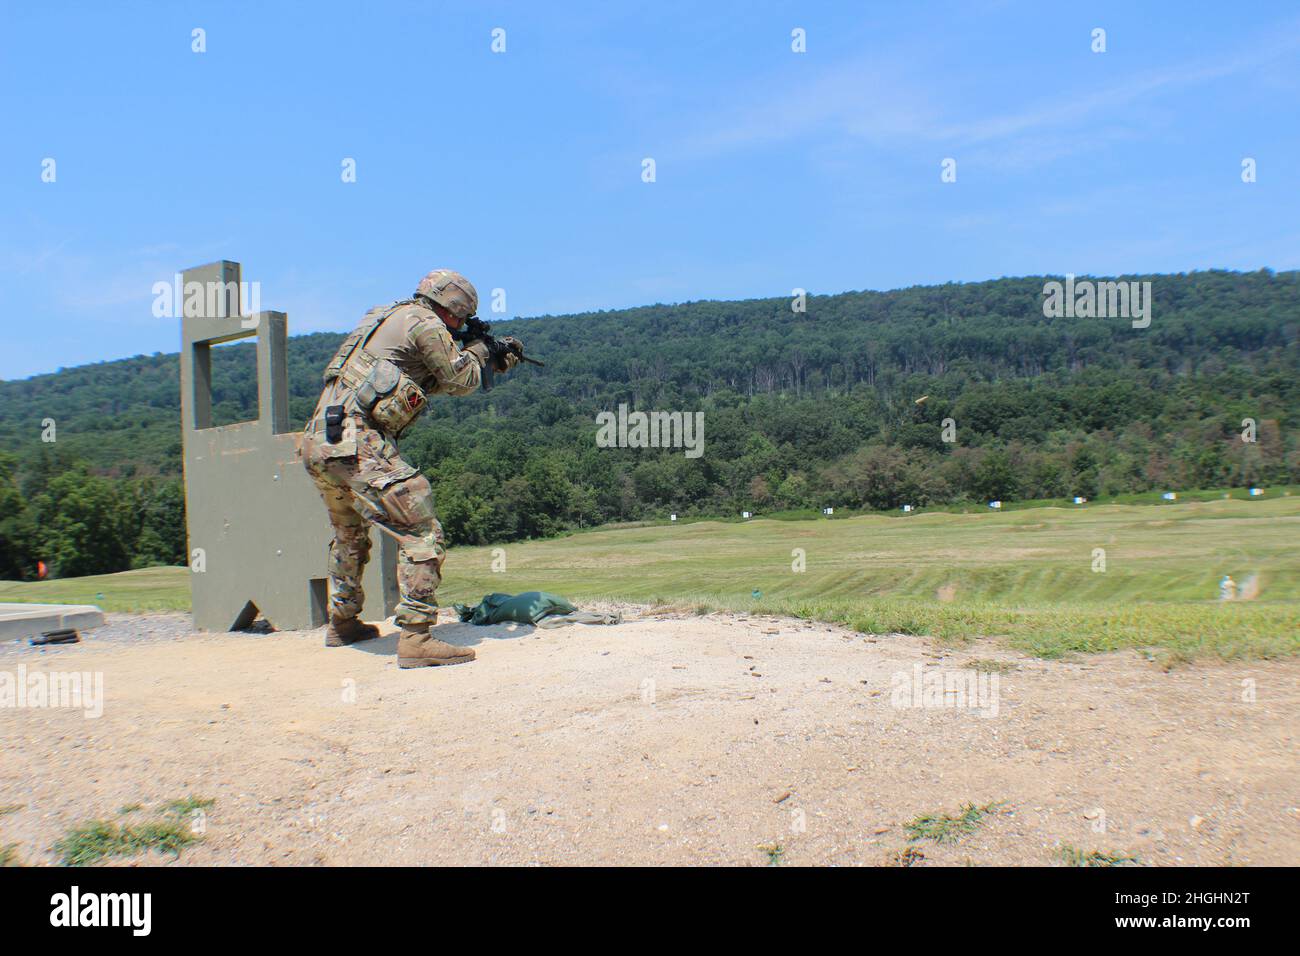 Members of the 109th Infantry Battalion, 28th Infantry Division, trained on ranges at Fort Indiantown Gap, Pennsylvania, August 6, in preparation for a mission in Egypt in the next year. Completing basic rifle qualification with the M4 is one of the 14 individual tasks and 4 collective tasks to complete prior to a mobilization. Stock Photo